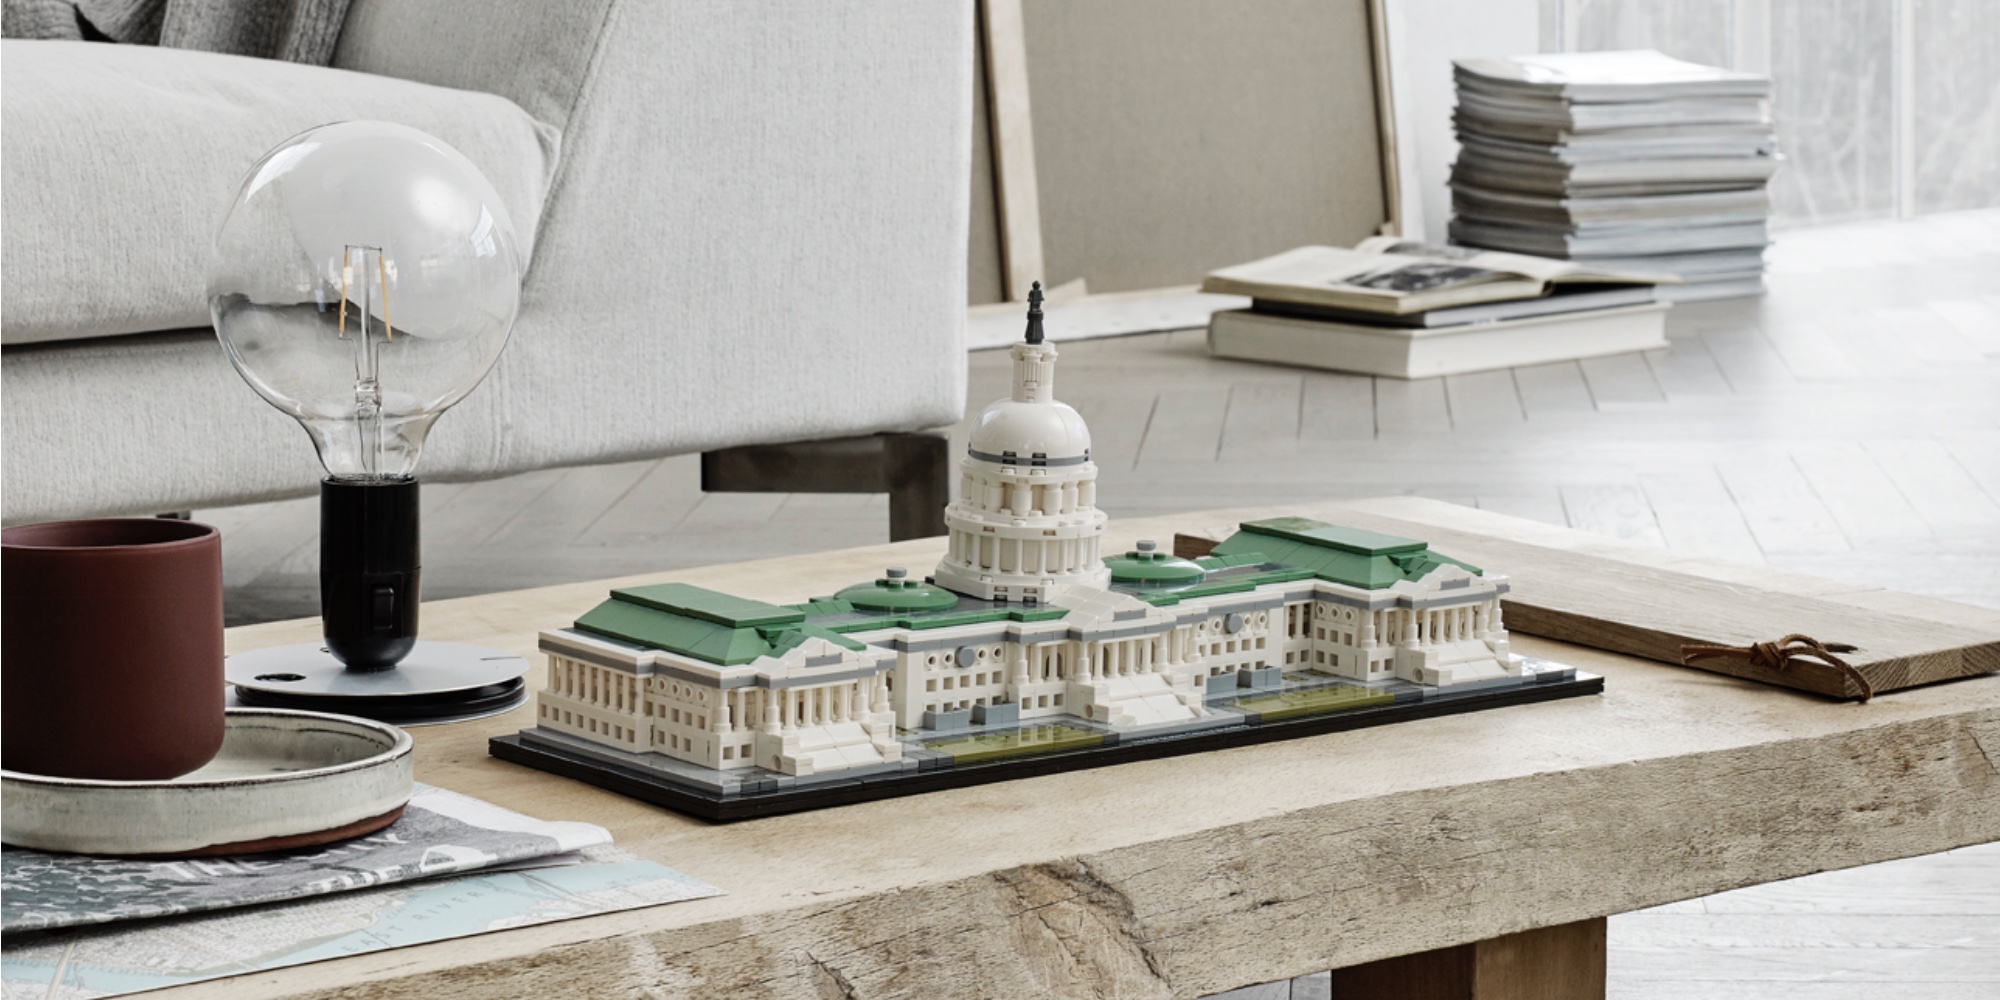 LEGO Capitol Building drops to 2019 low at $75 + from - 9to5Toys